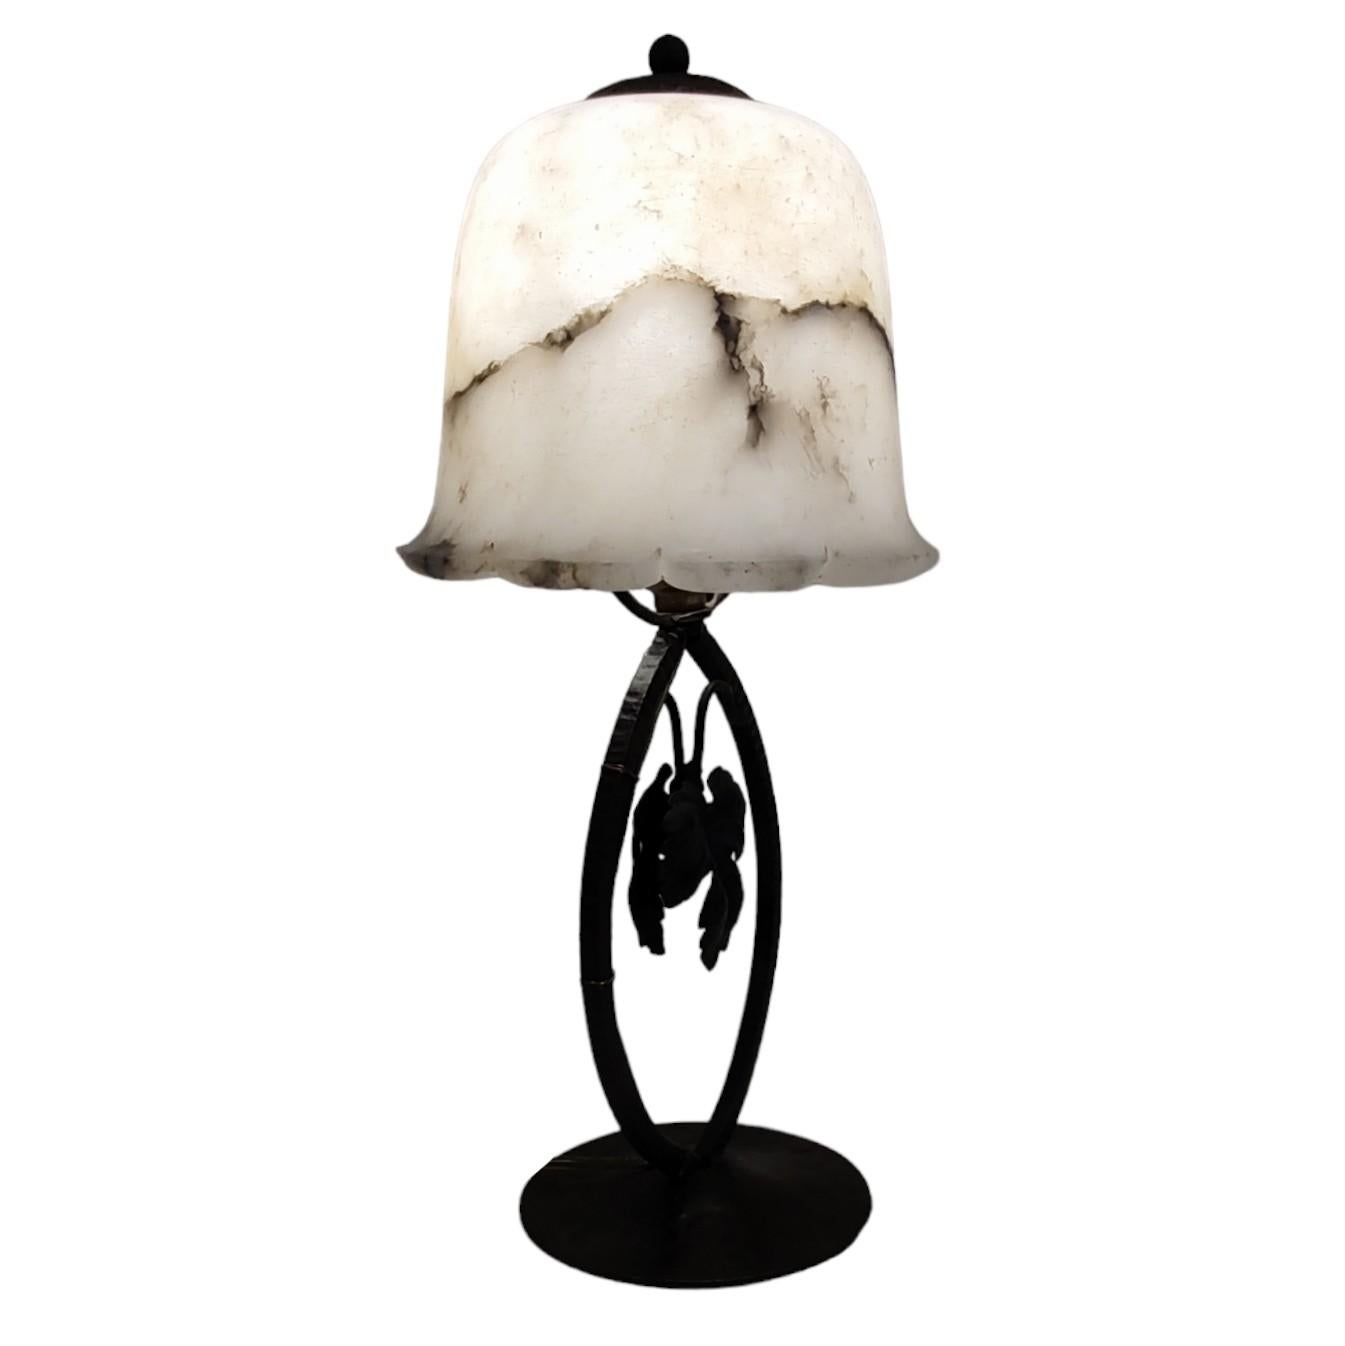 Art Deco Table Lamp - 1930s

A wonderful French 1930s Art Deco table lamps. The lamp has a black metal base and a pressed alabaster lampshade. 

This table lamp is an absolute design classic from the ART DECO period.